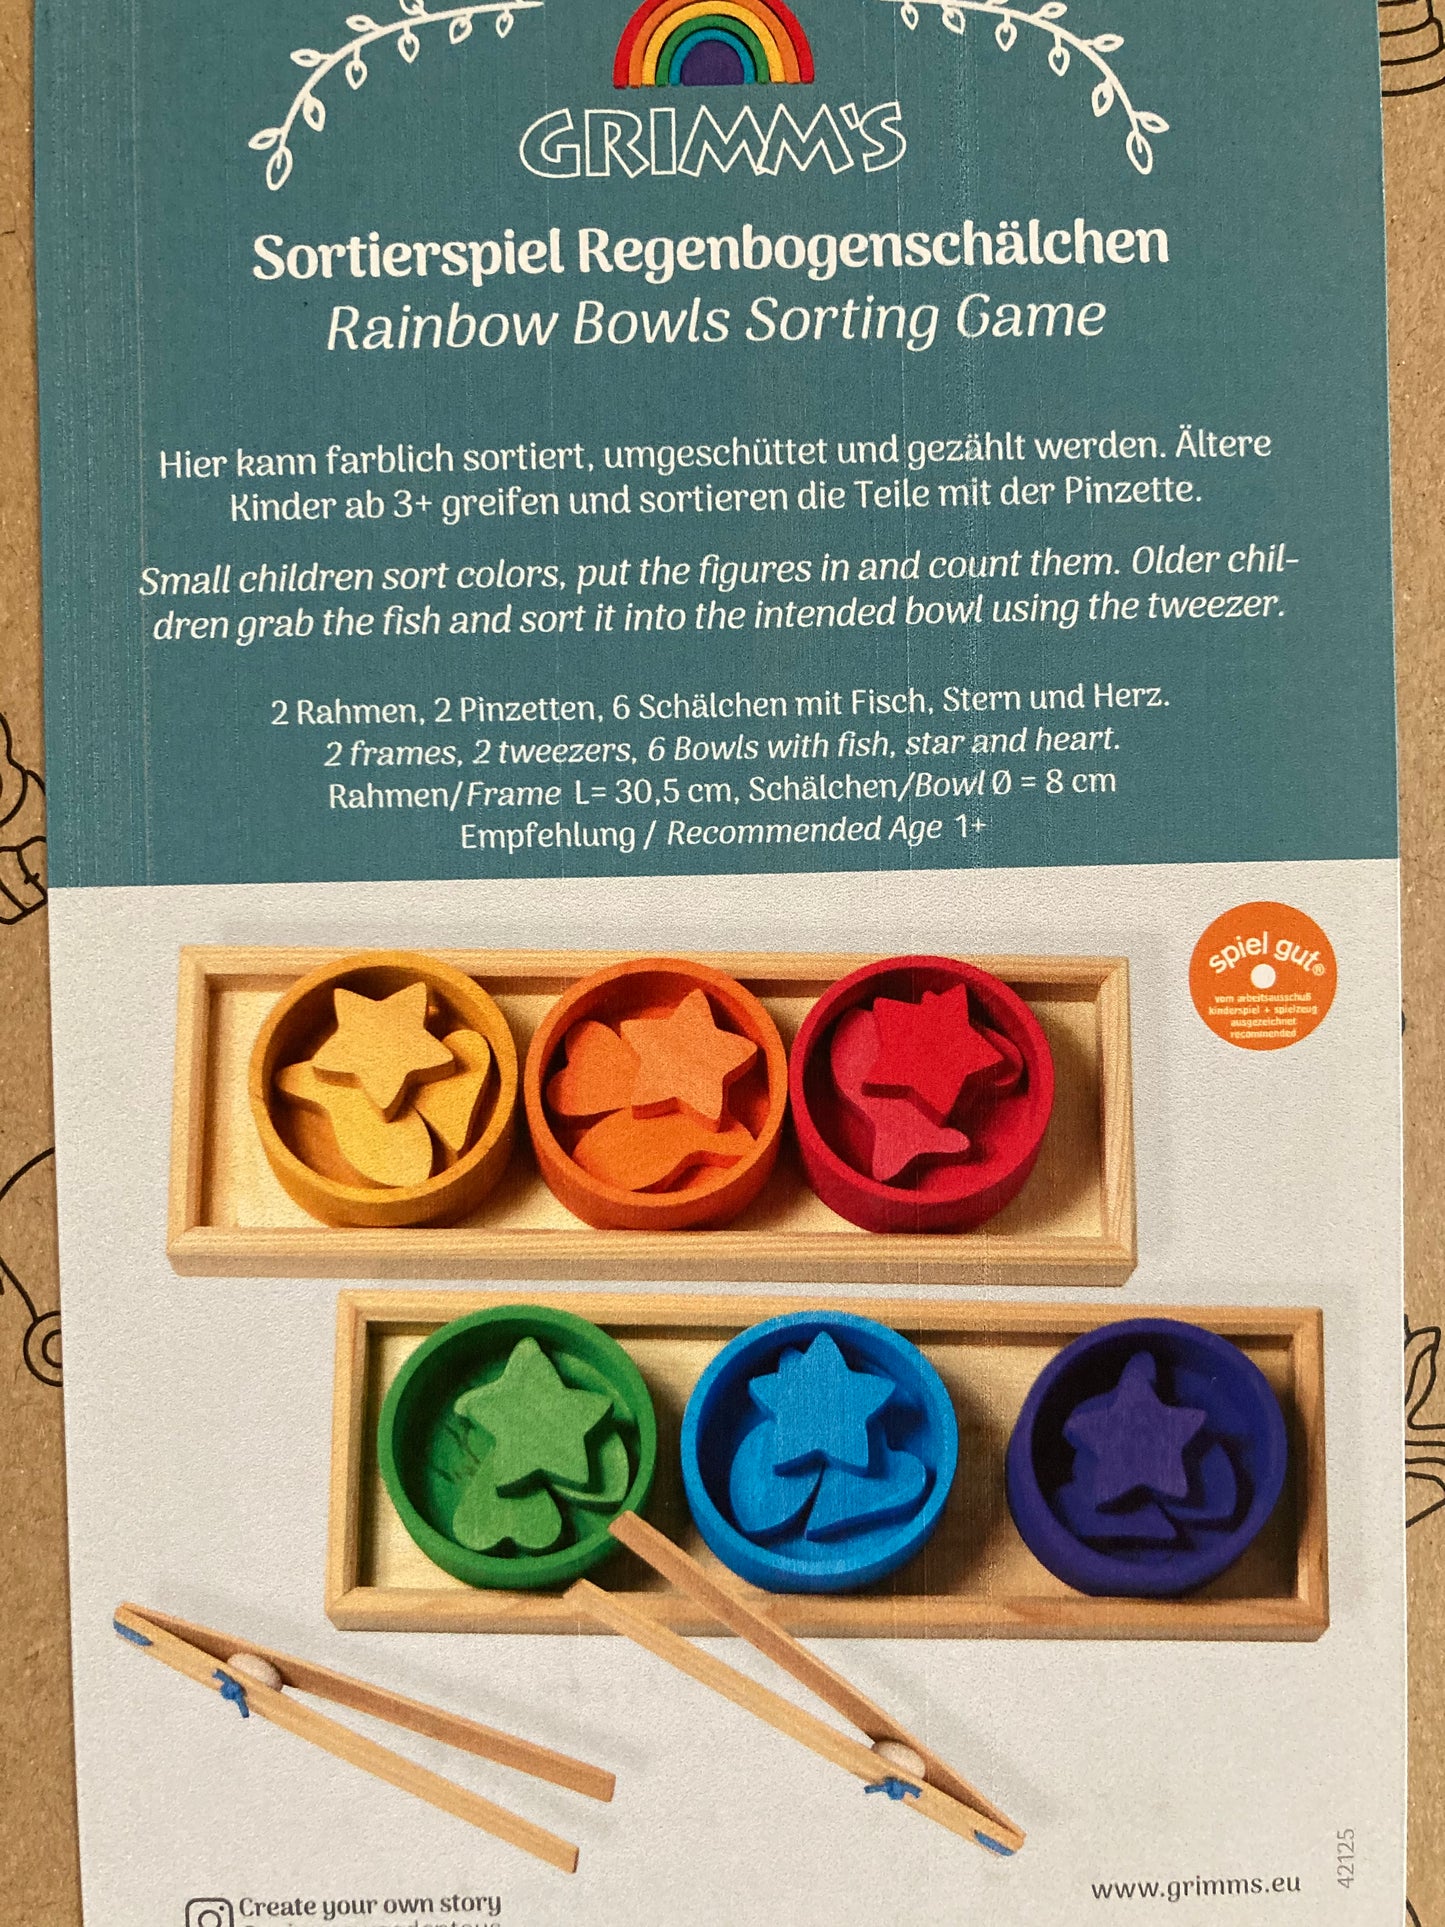 Wooden Toy Game - Grimm's RAINBOW BOWLS SORTING SET, 28 pieces!